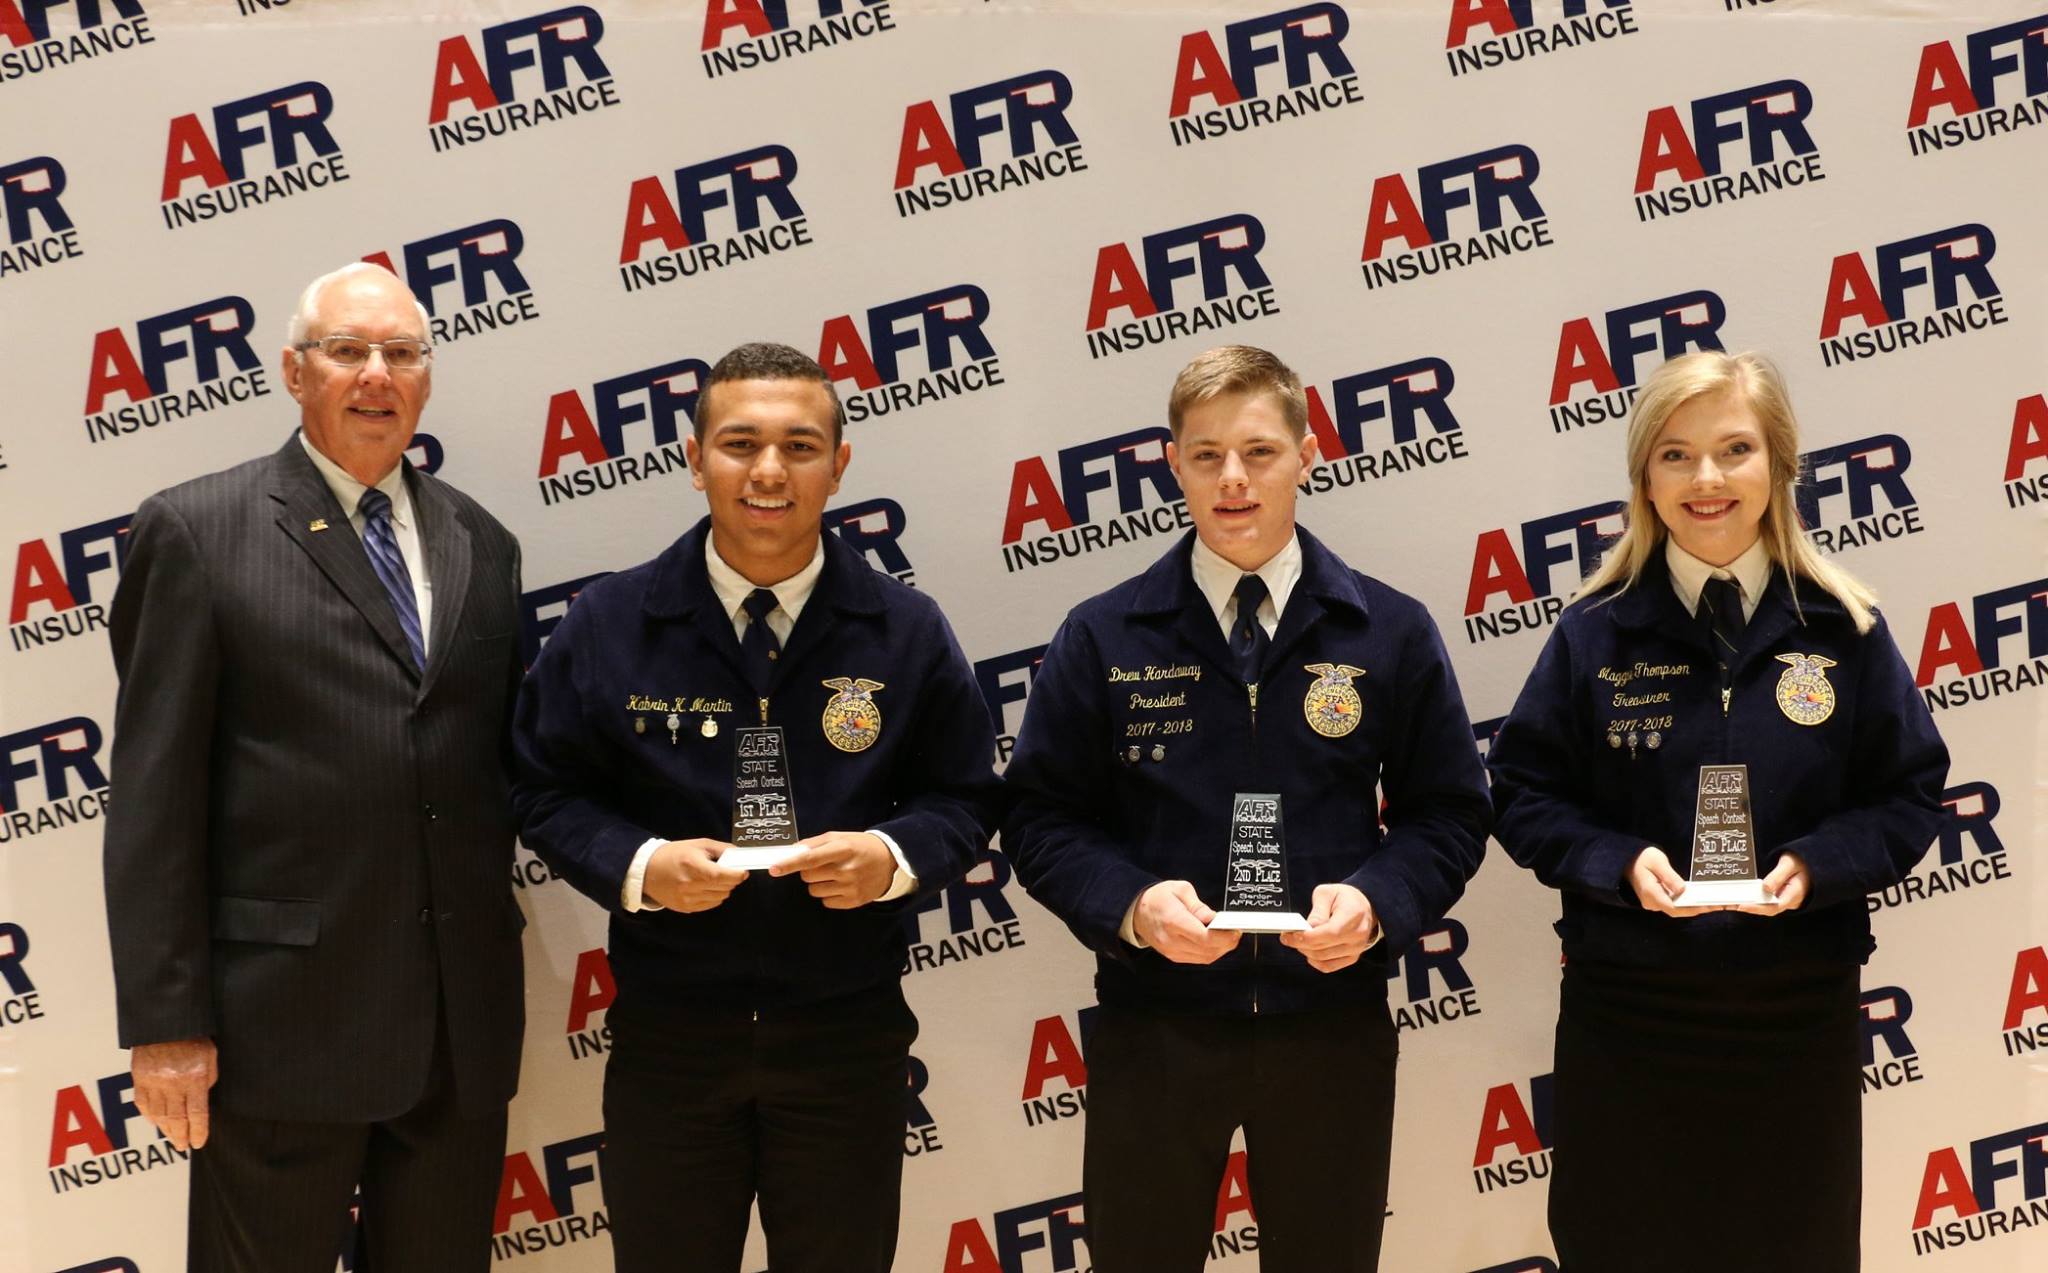 AFR Congratulates the Winners and Participants of the 2017 AFR Youth State Speech Contest